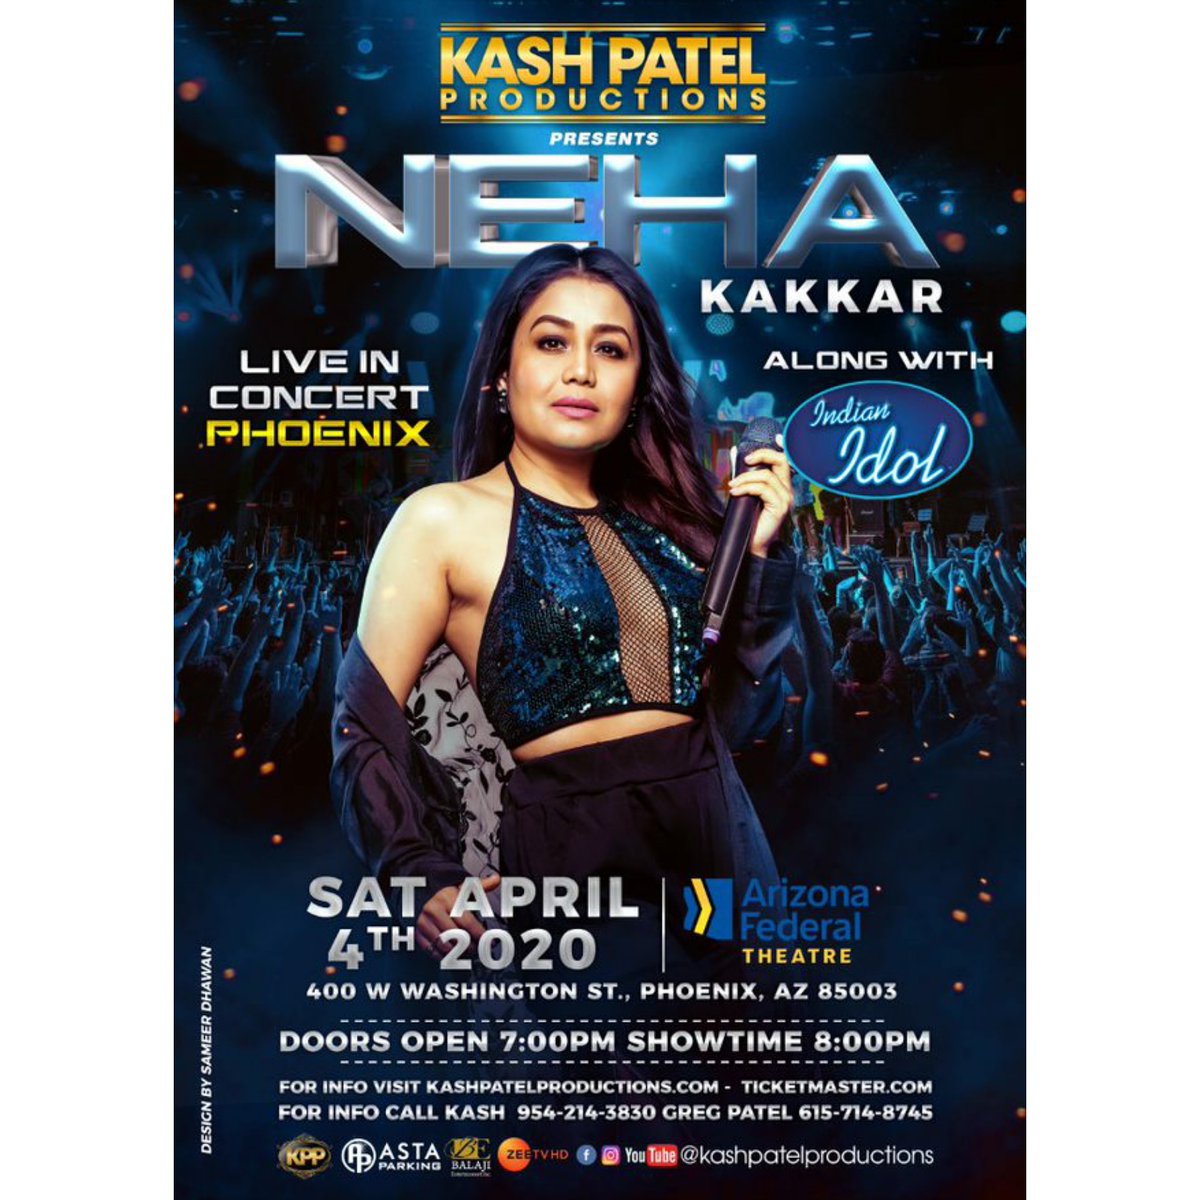 #NehaKakkar is coming to steal the show with her high-on-energy Bollywood numbers #Phoenix !!🎸🎶😍😍 Presented to you by Kash Patel Productions.❤️❤️
#KashPatelProductions #KashPatel #LiveConcert #LiveMusic #KansasCity #IndianIdol #Arizona #ArizonaFederalTheatre #US #UnitedStates